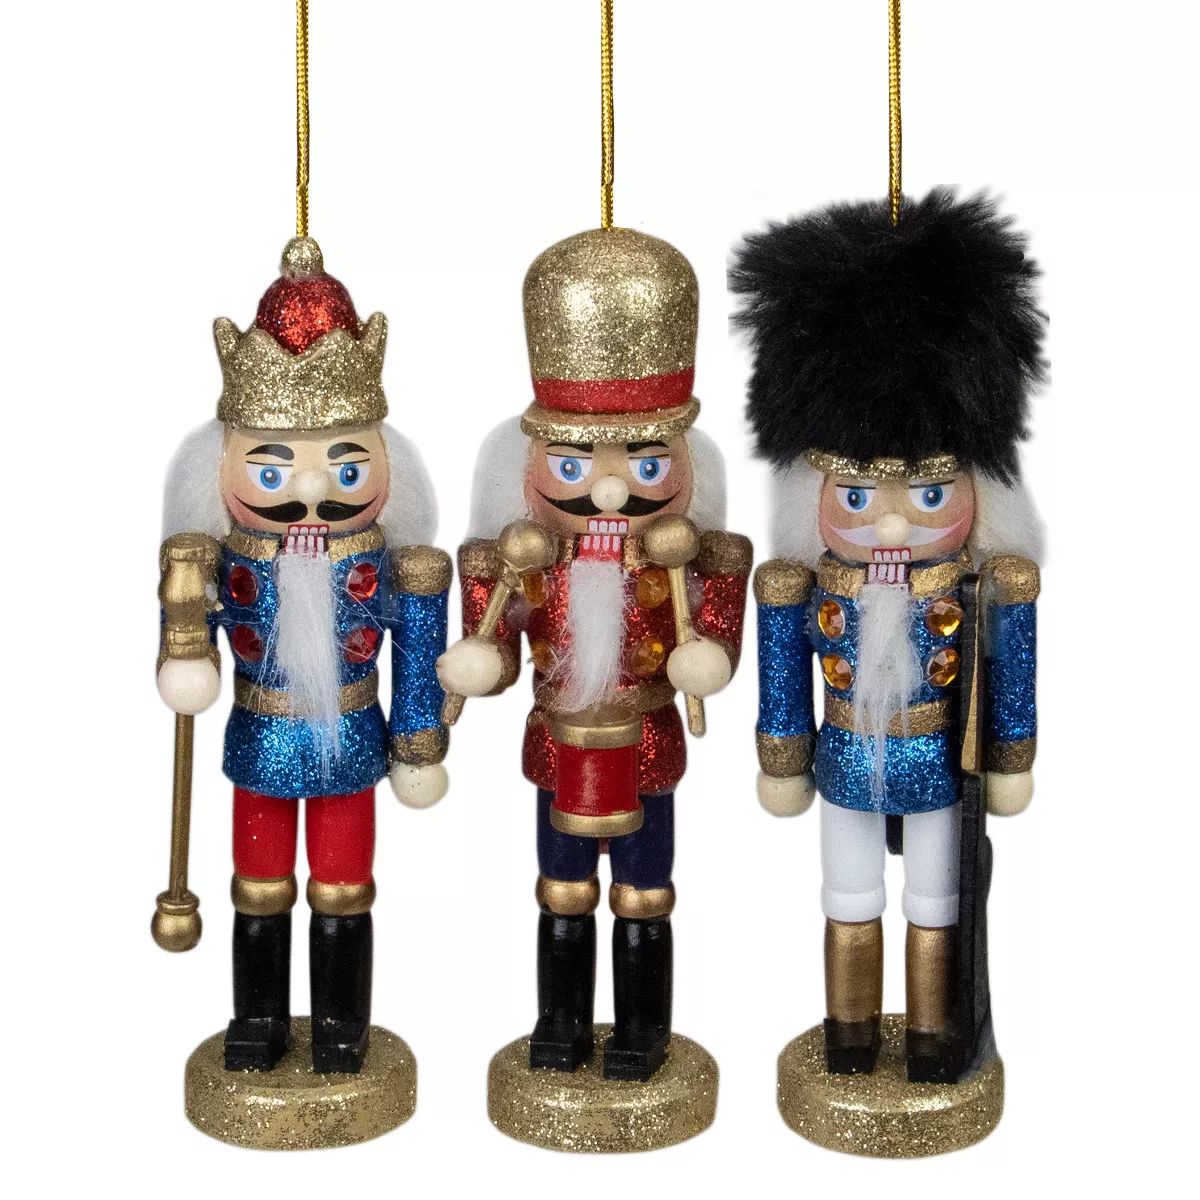 Northlight Set of 3 Glittery Nutcracker King, Soldier and Drummer Ornaments 5.25" | Target